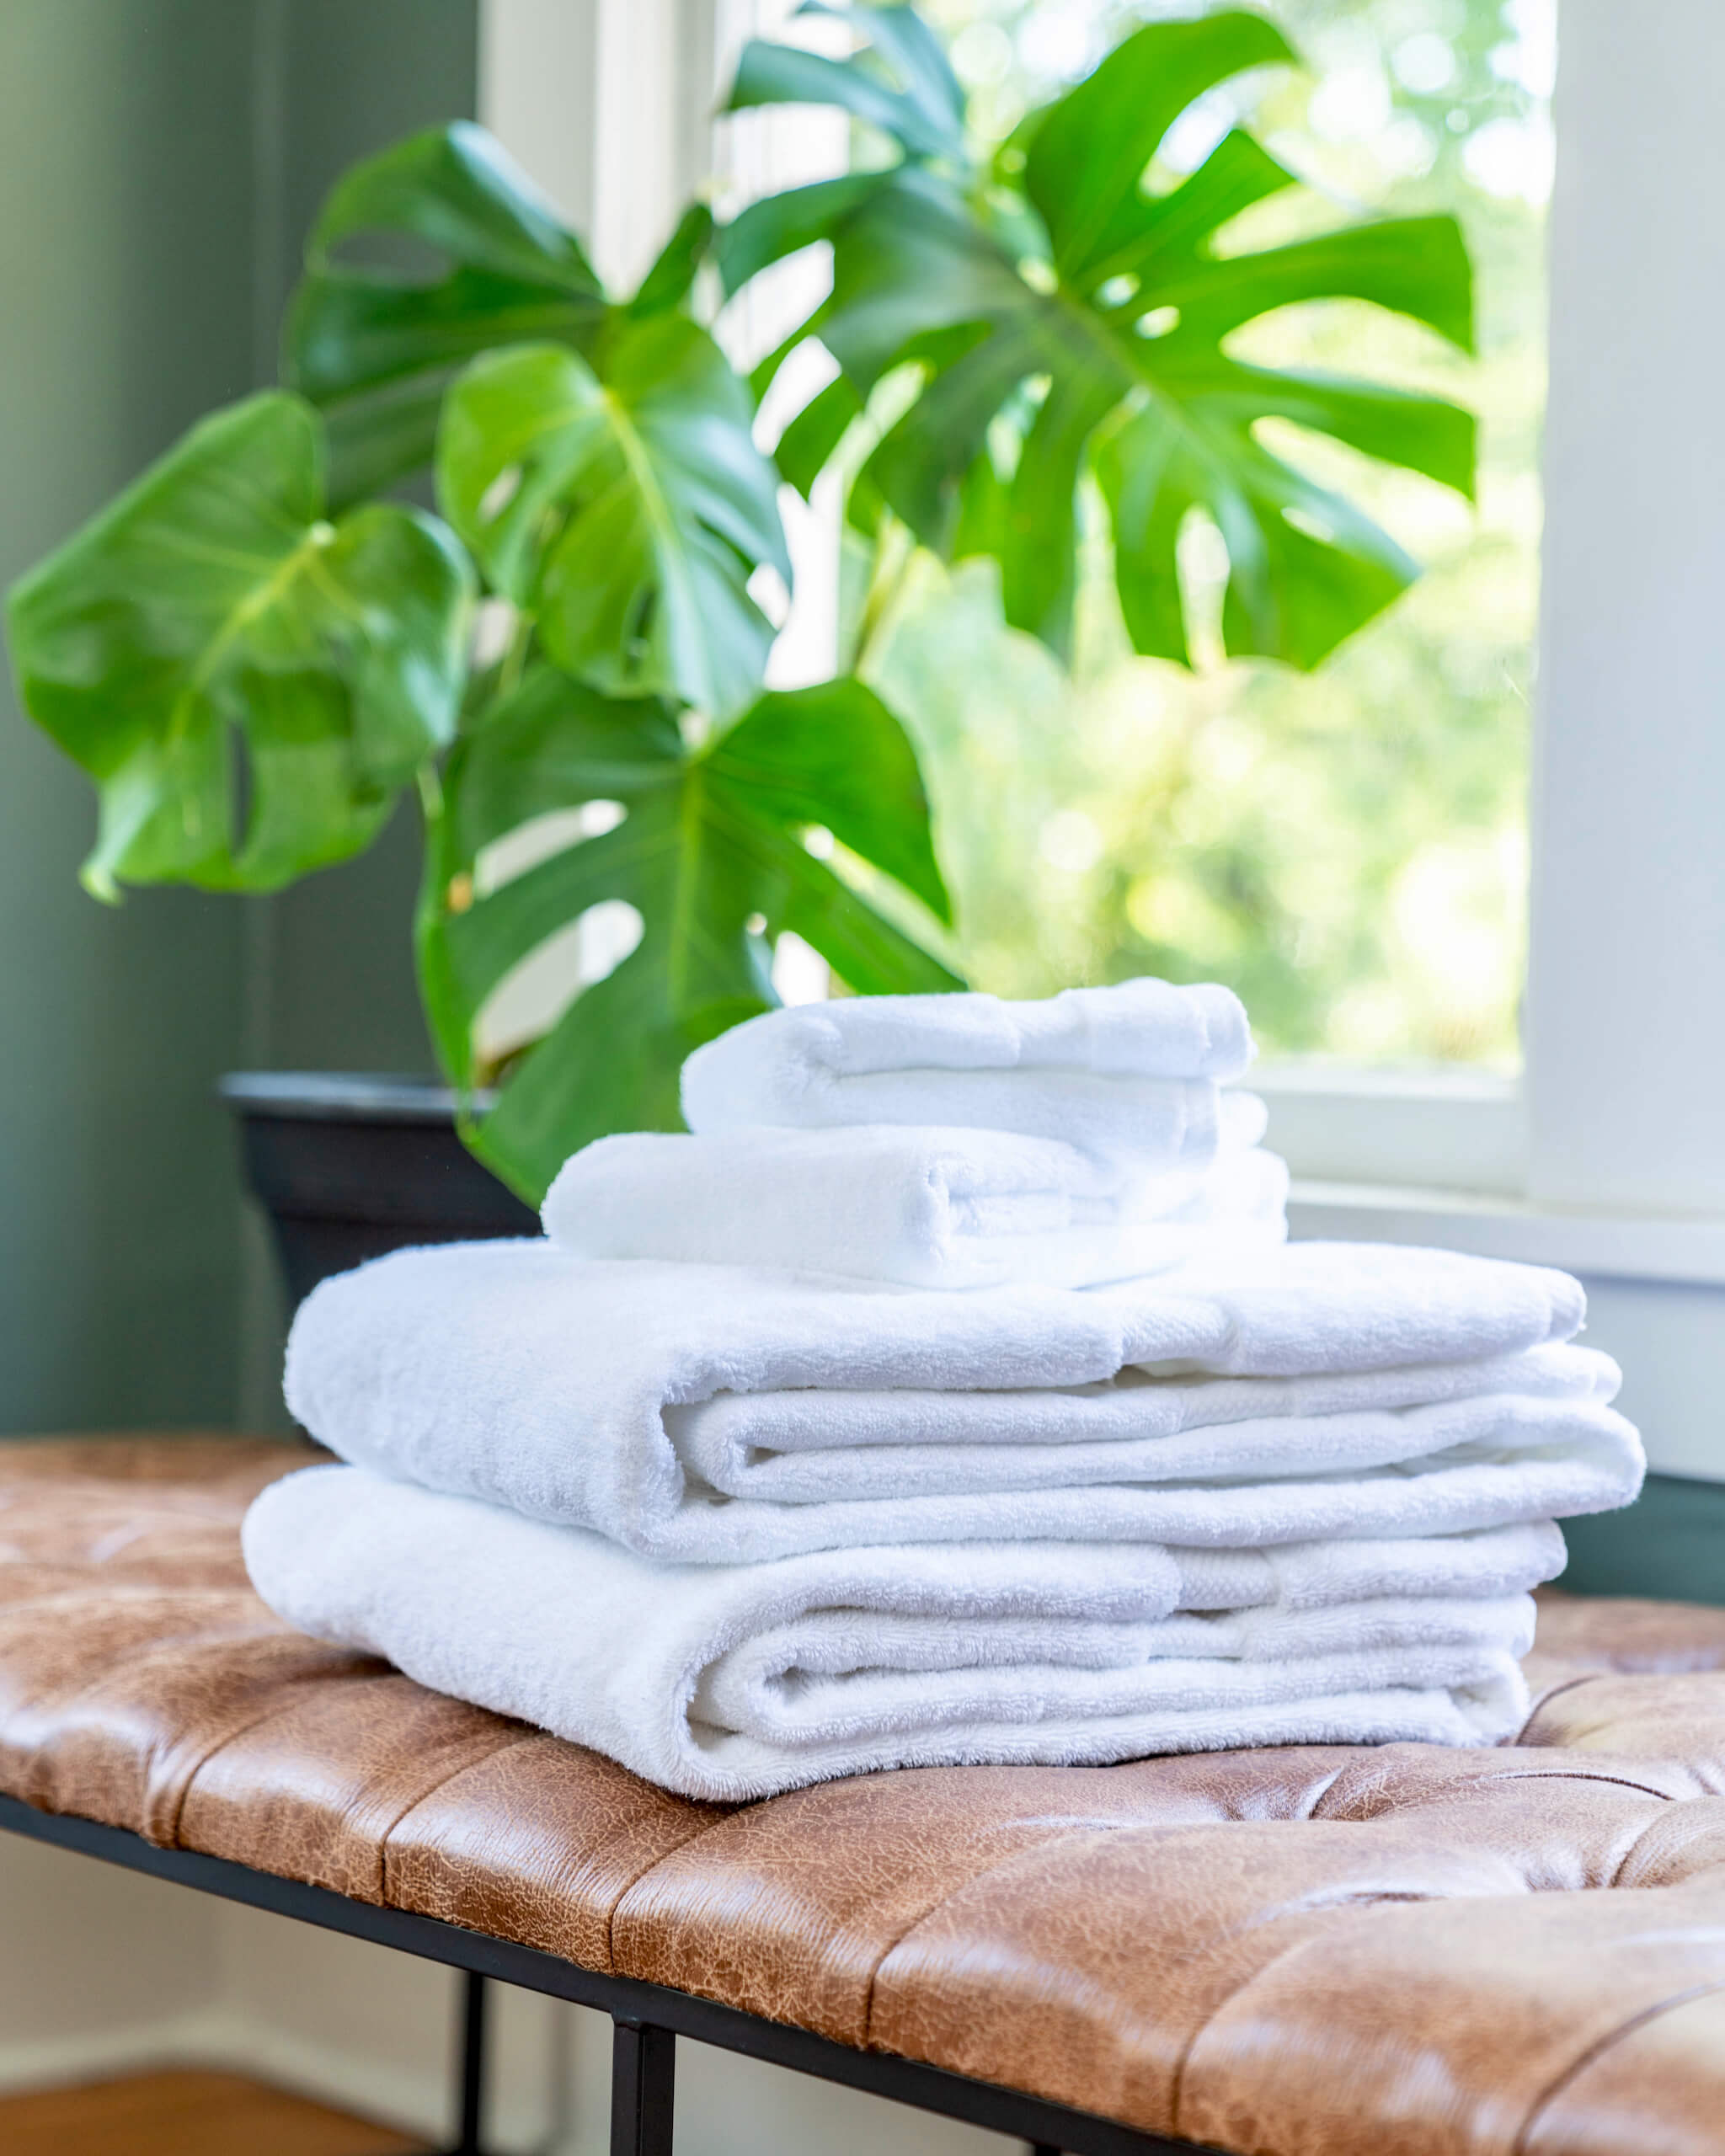 Made in USA Cotton Bath Towels